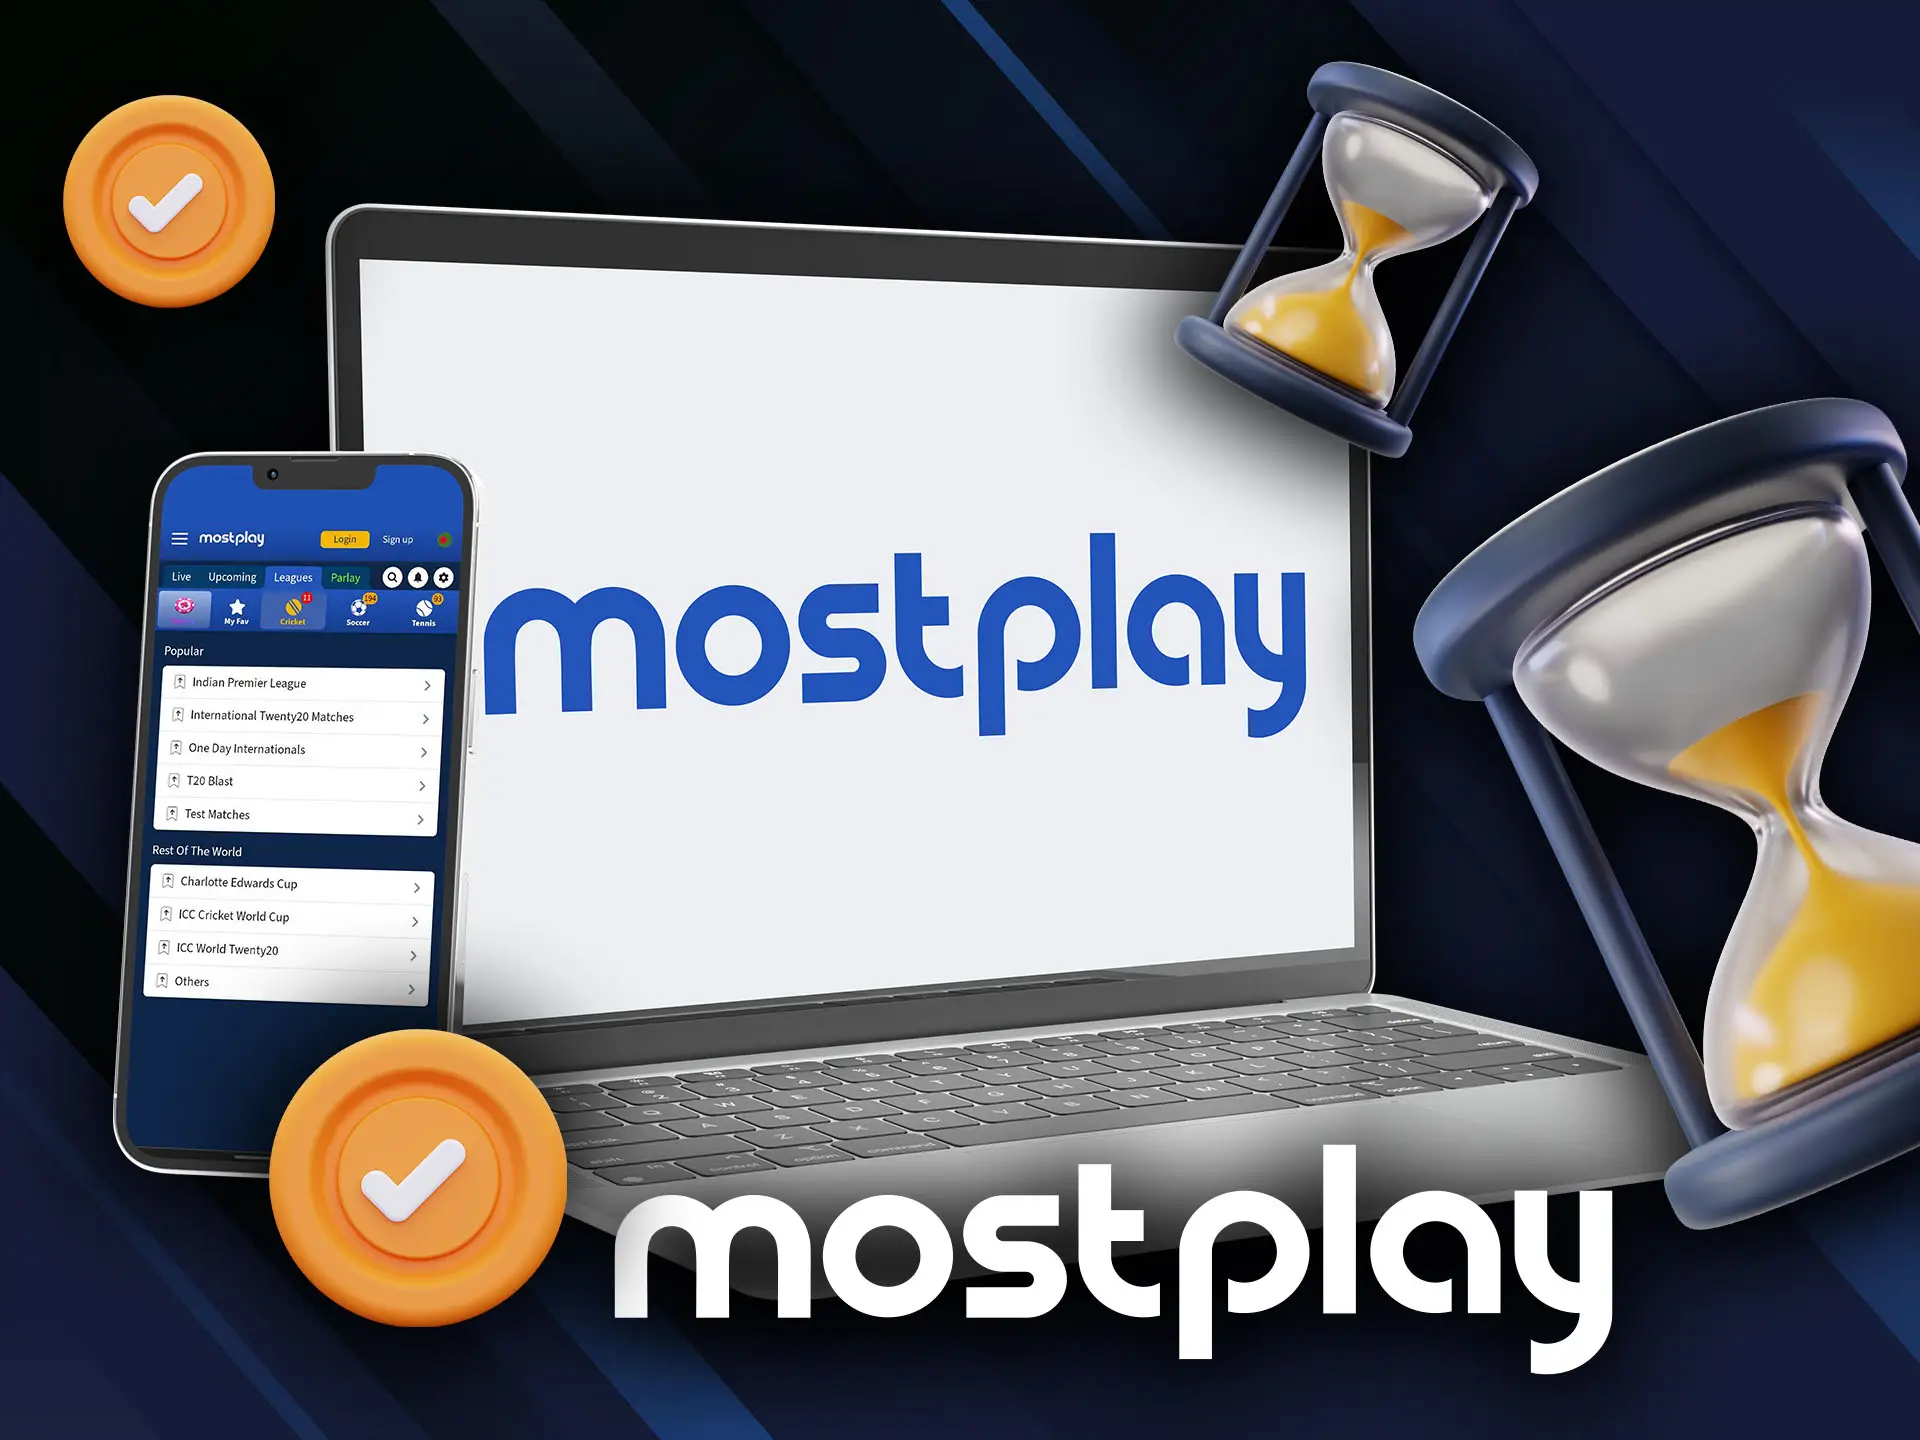 Download Mostplay PC client on your computer.